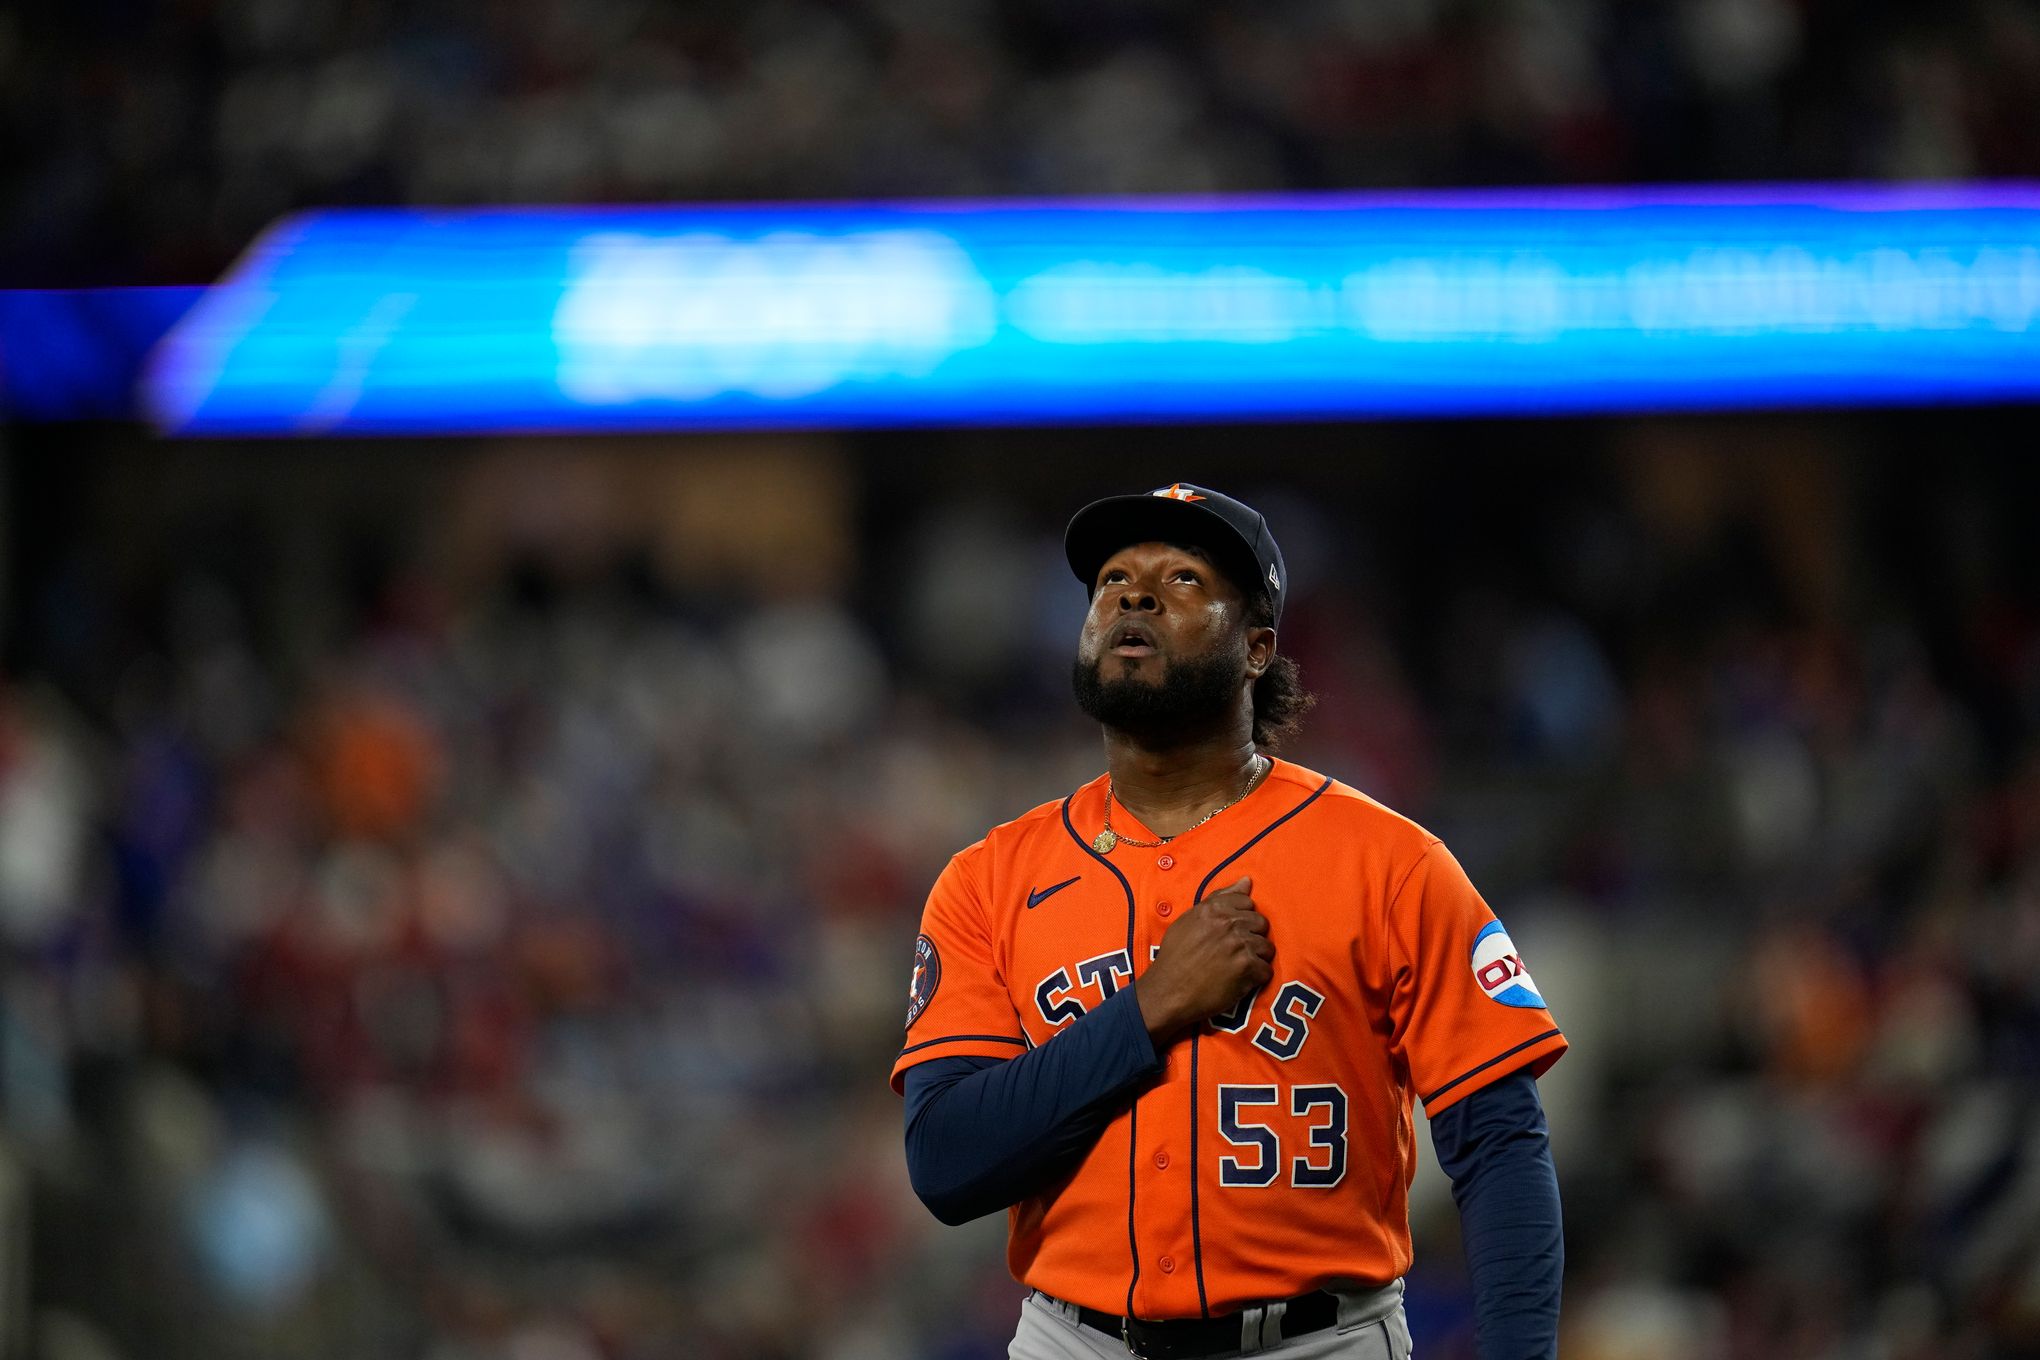 Houston Astros: Who was the fan who made one-handed catch of homer?